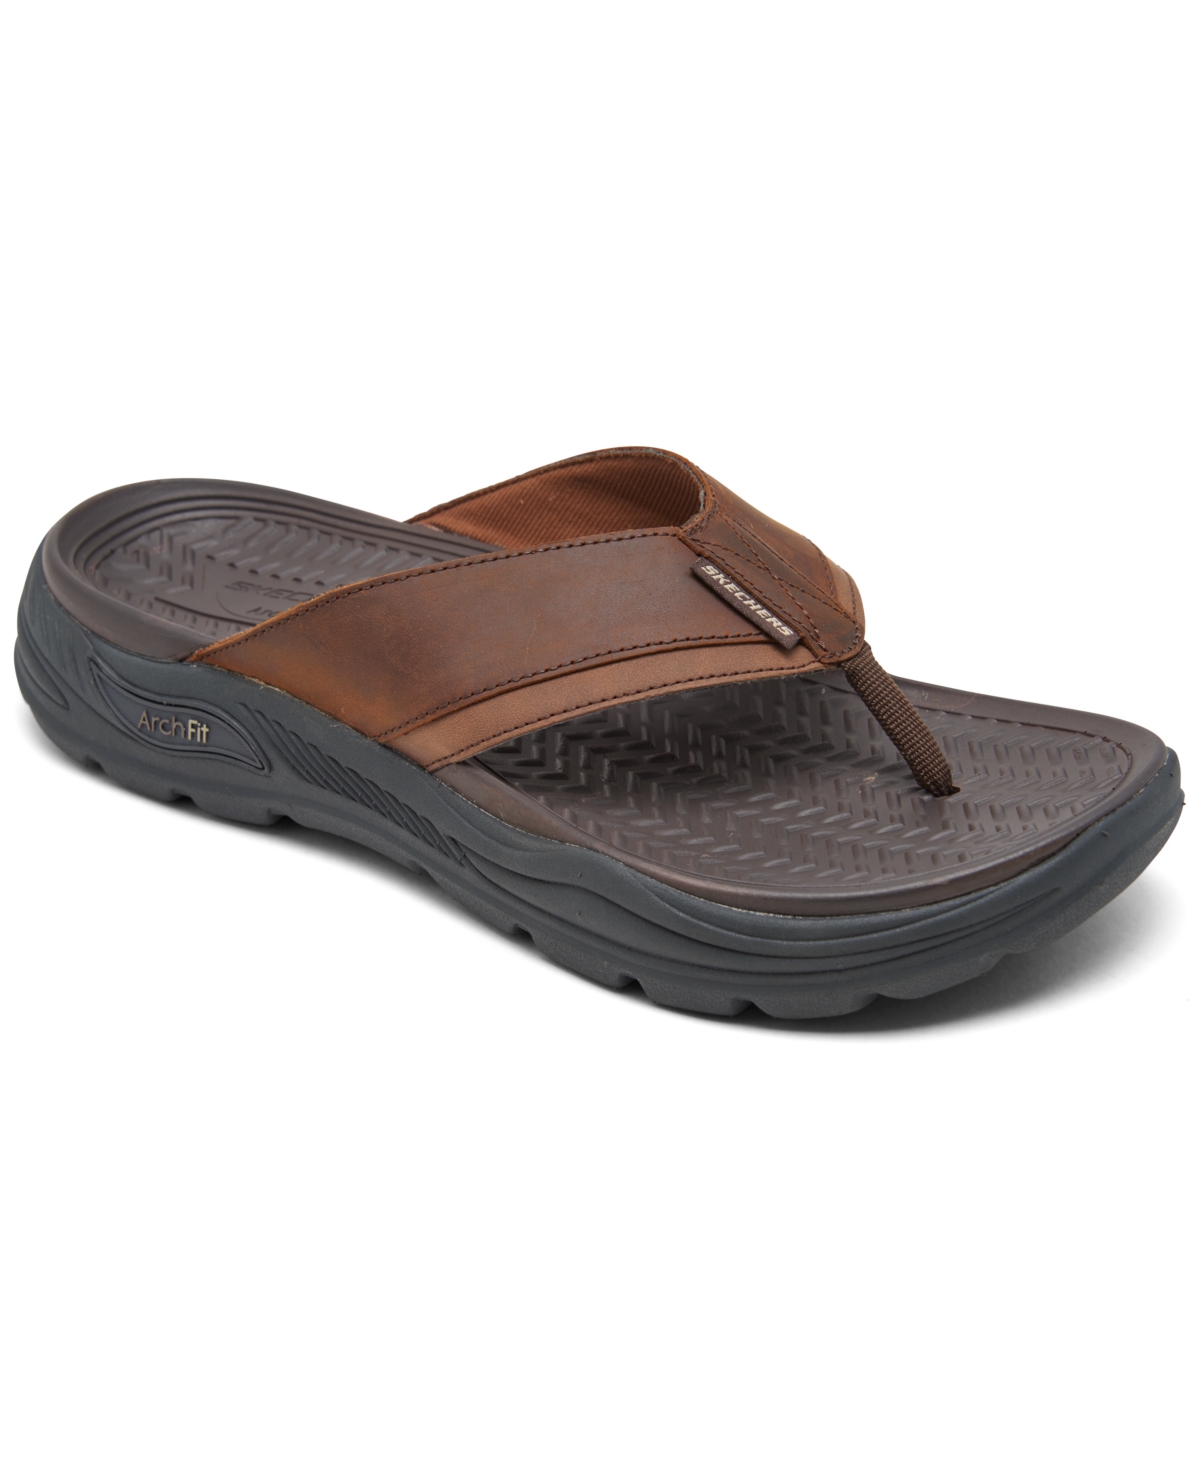 Skechers Arch Motley - Malico Thong Sandals from Finish Line - Macy's